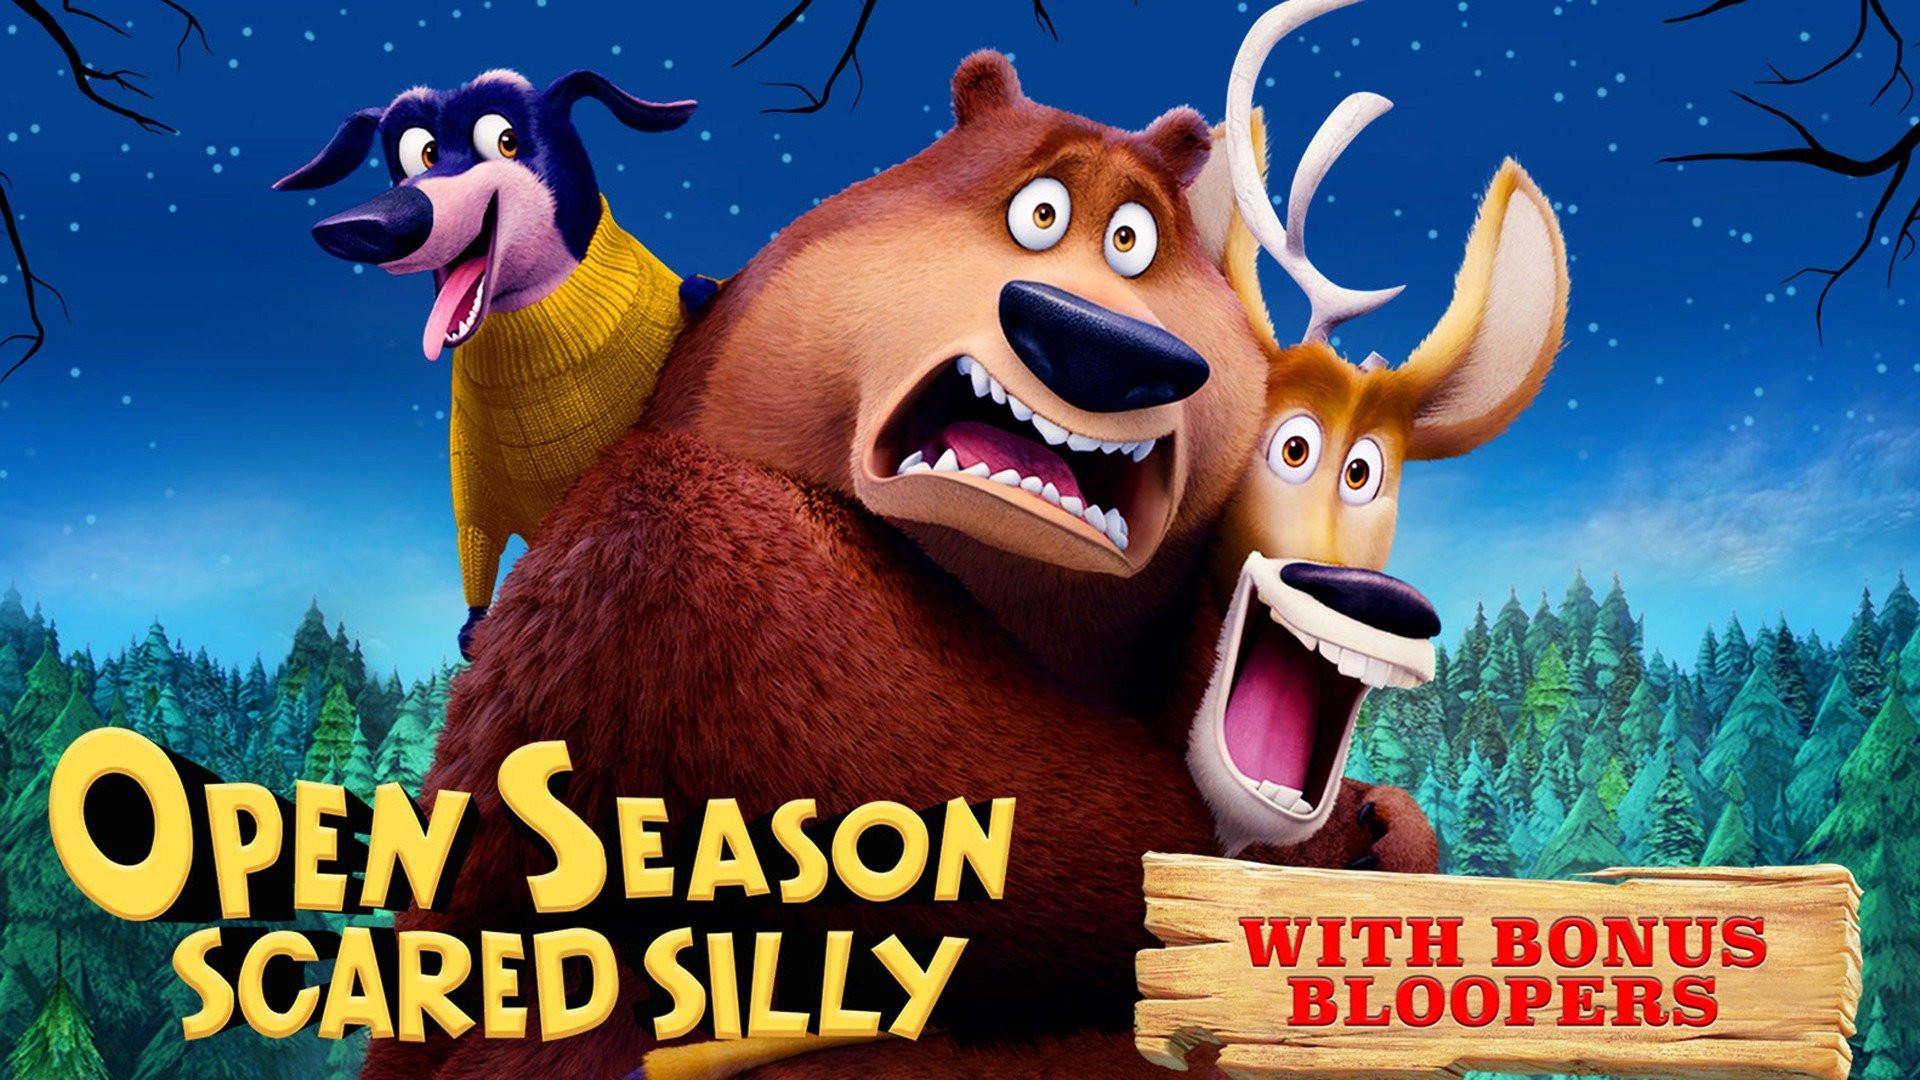 Watch Open Season: Scared Silly with Bloopers Online